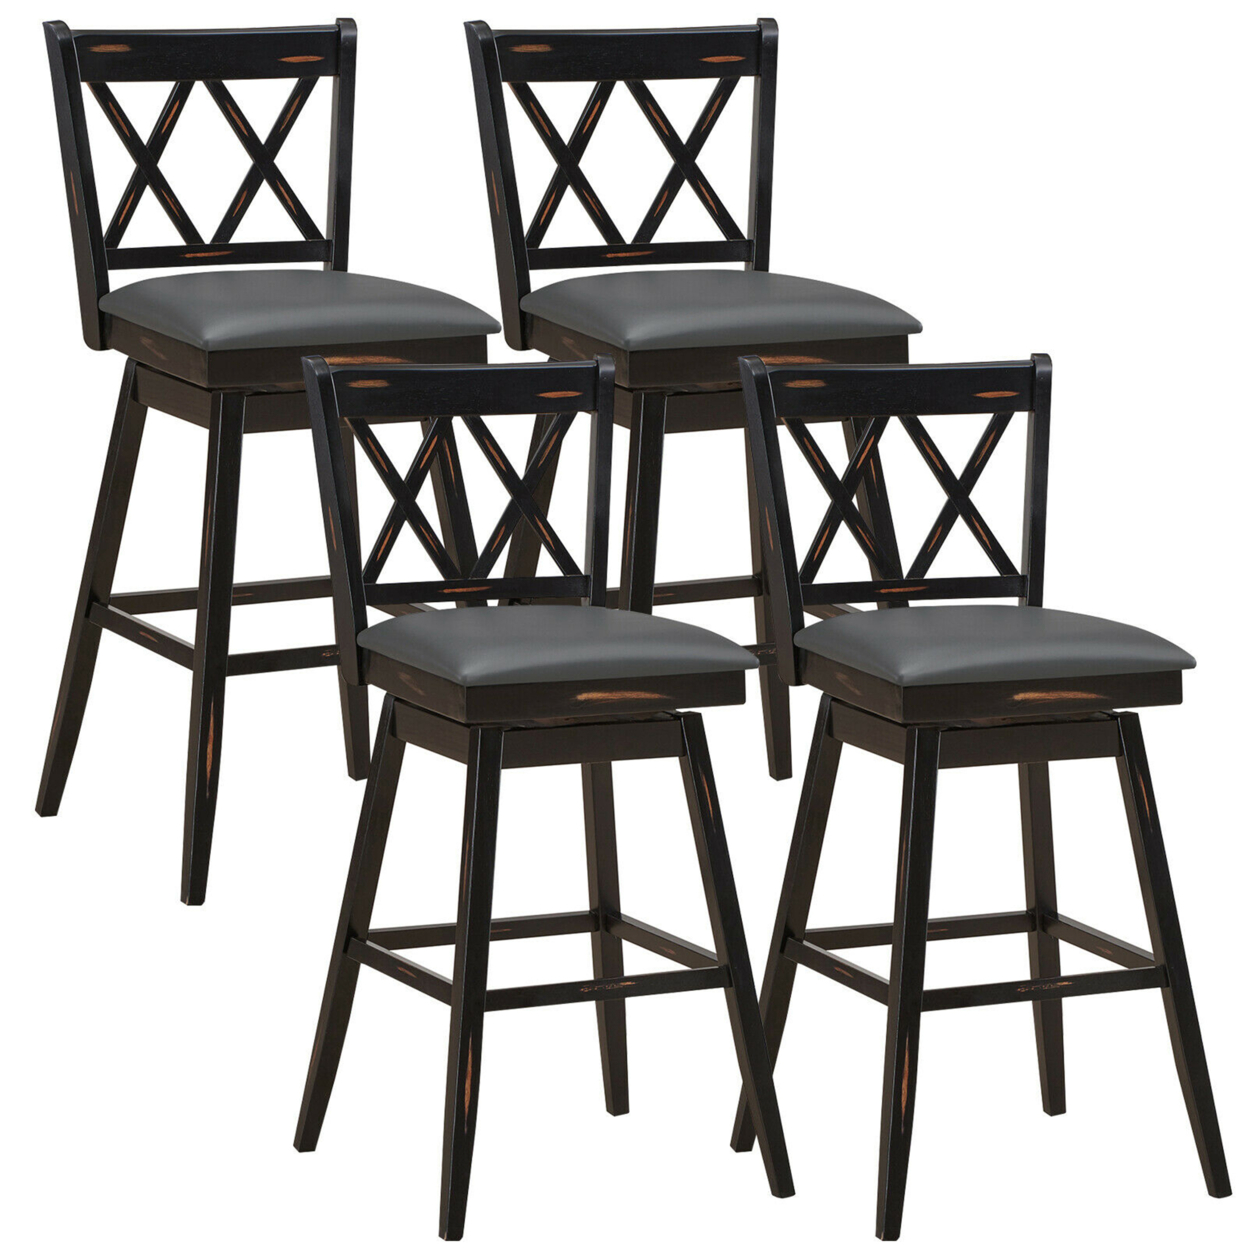 Set Of 4 Barstools Swivel Bar Height Chairs With Rubber Wood Legs - Black